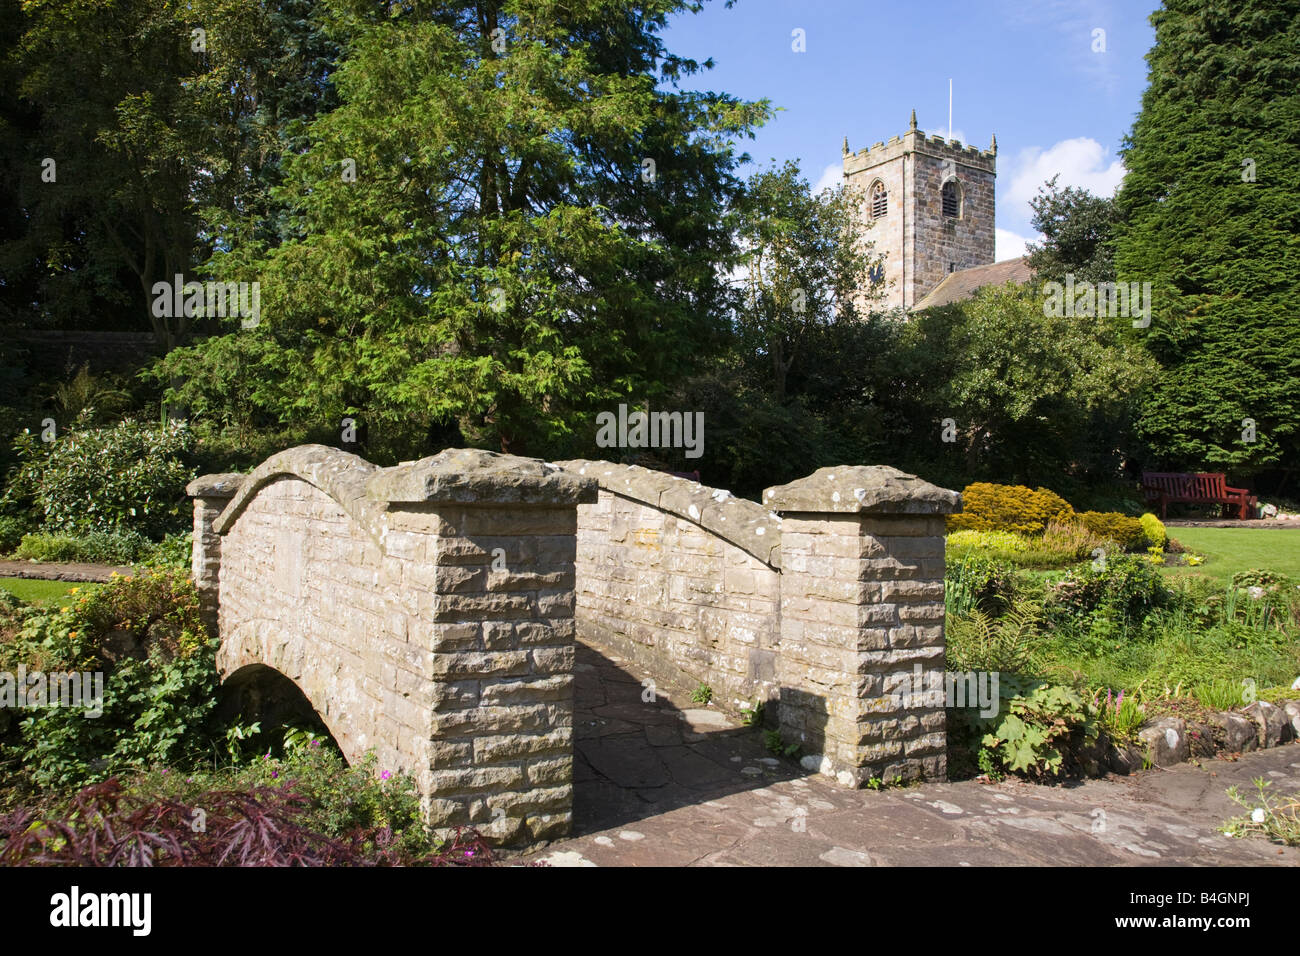 Bridge in Coronation gardens in the village of Waddington Lancashire with St Helens Church in the background Stock Photo